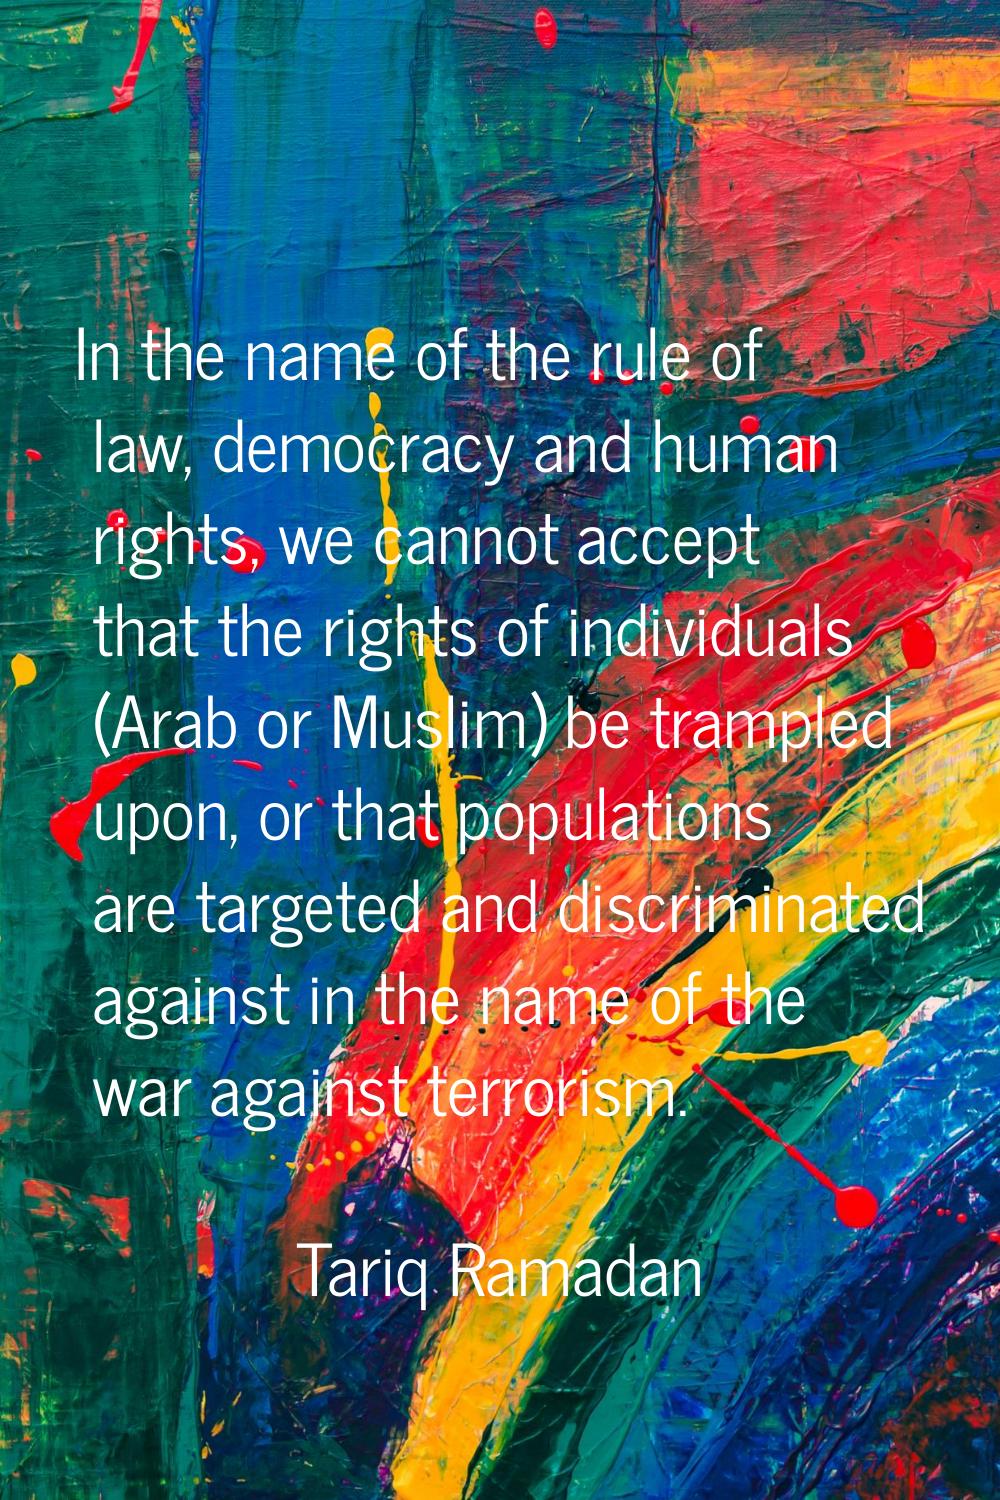 In the name of the rule of law, democracy and human rights, we cannot accept that the rights of ind